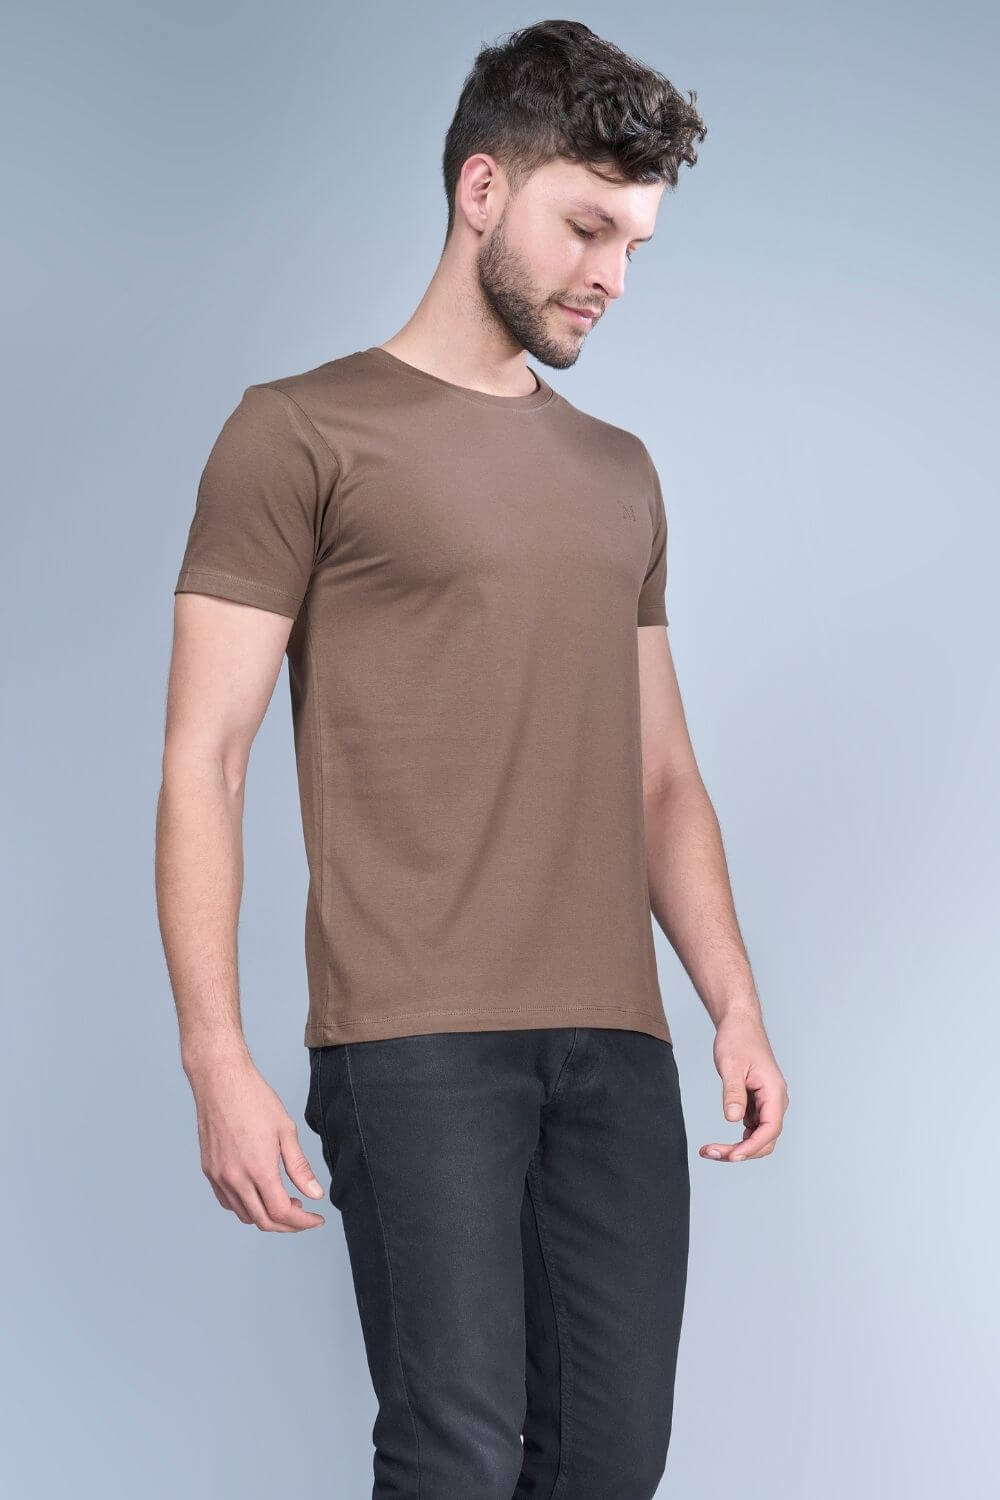 Brown colored, cotton solid T shirt for men with half sleeves and round neck from vibgyor series collection, side view.